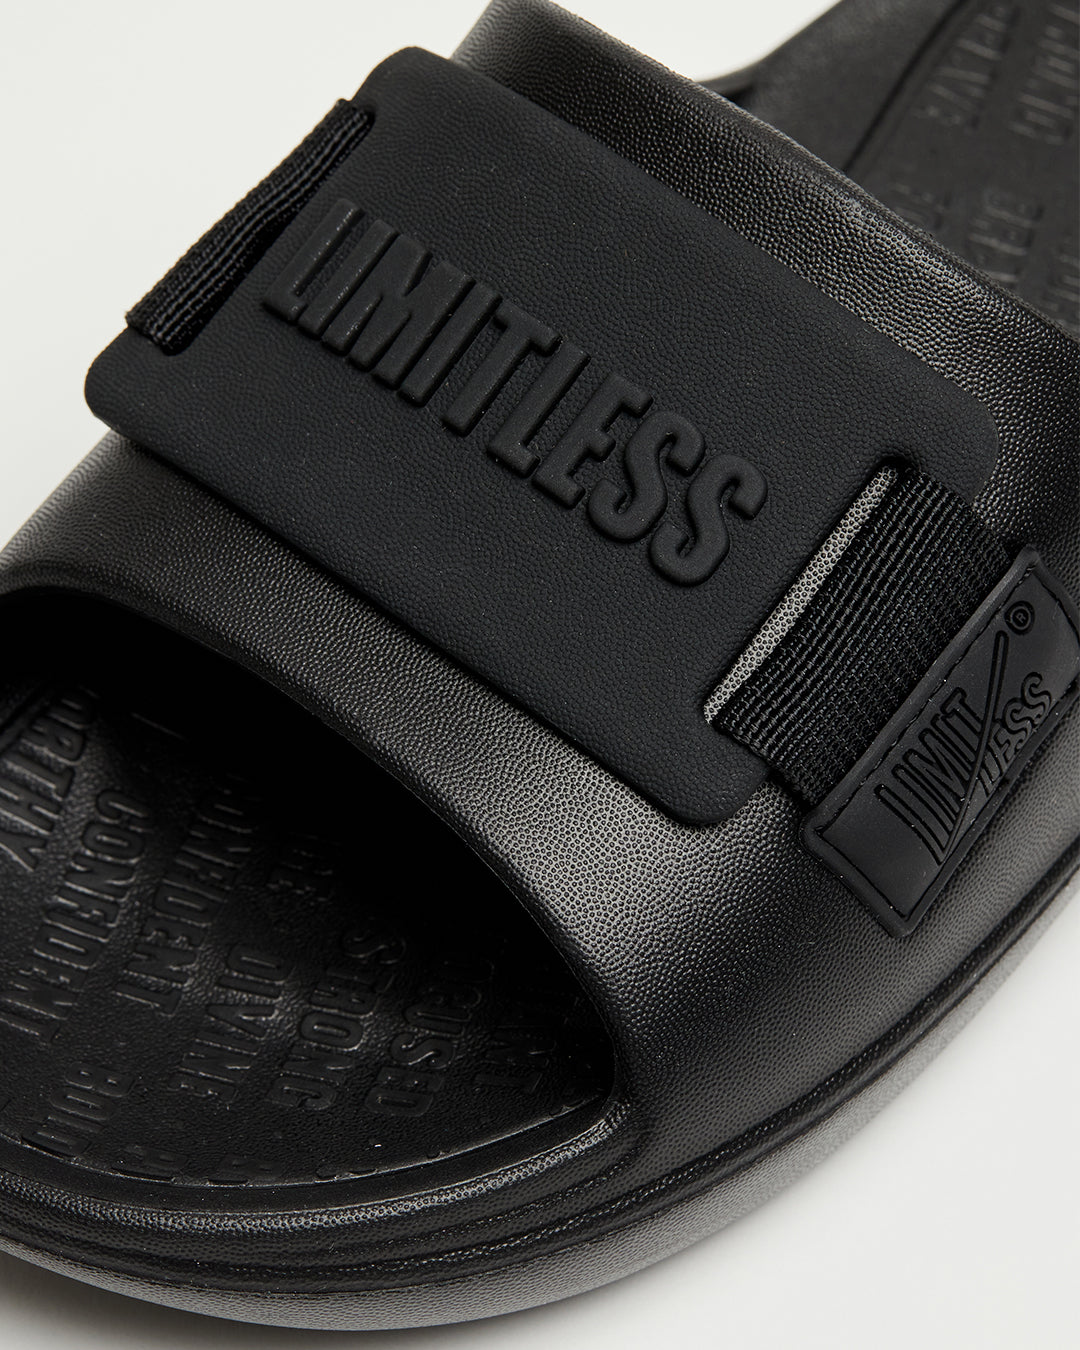 LIMITLESS SLIDES™ WITH ESSENTIAL TIBAH™ QUAD - MATER BAY ACADEMY EDITION